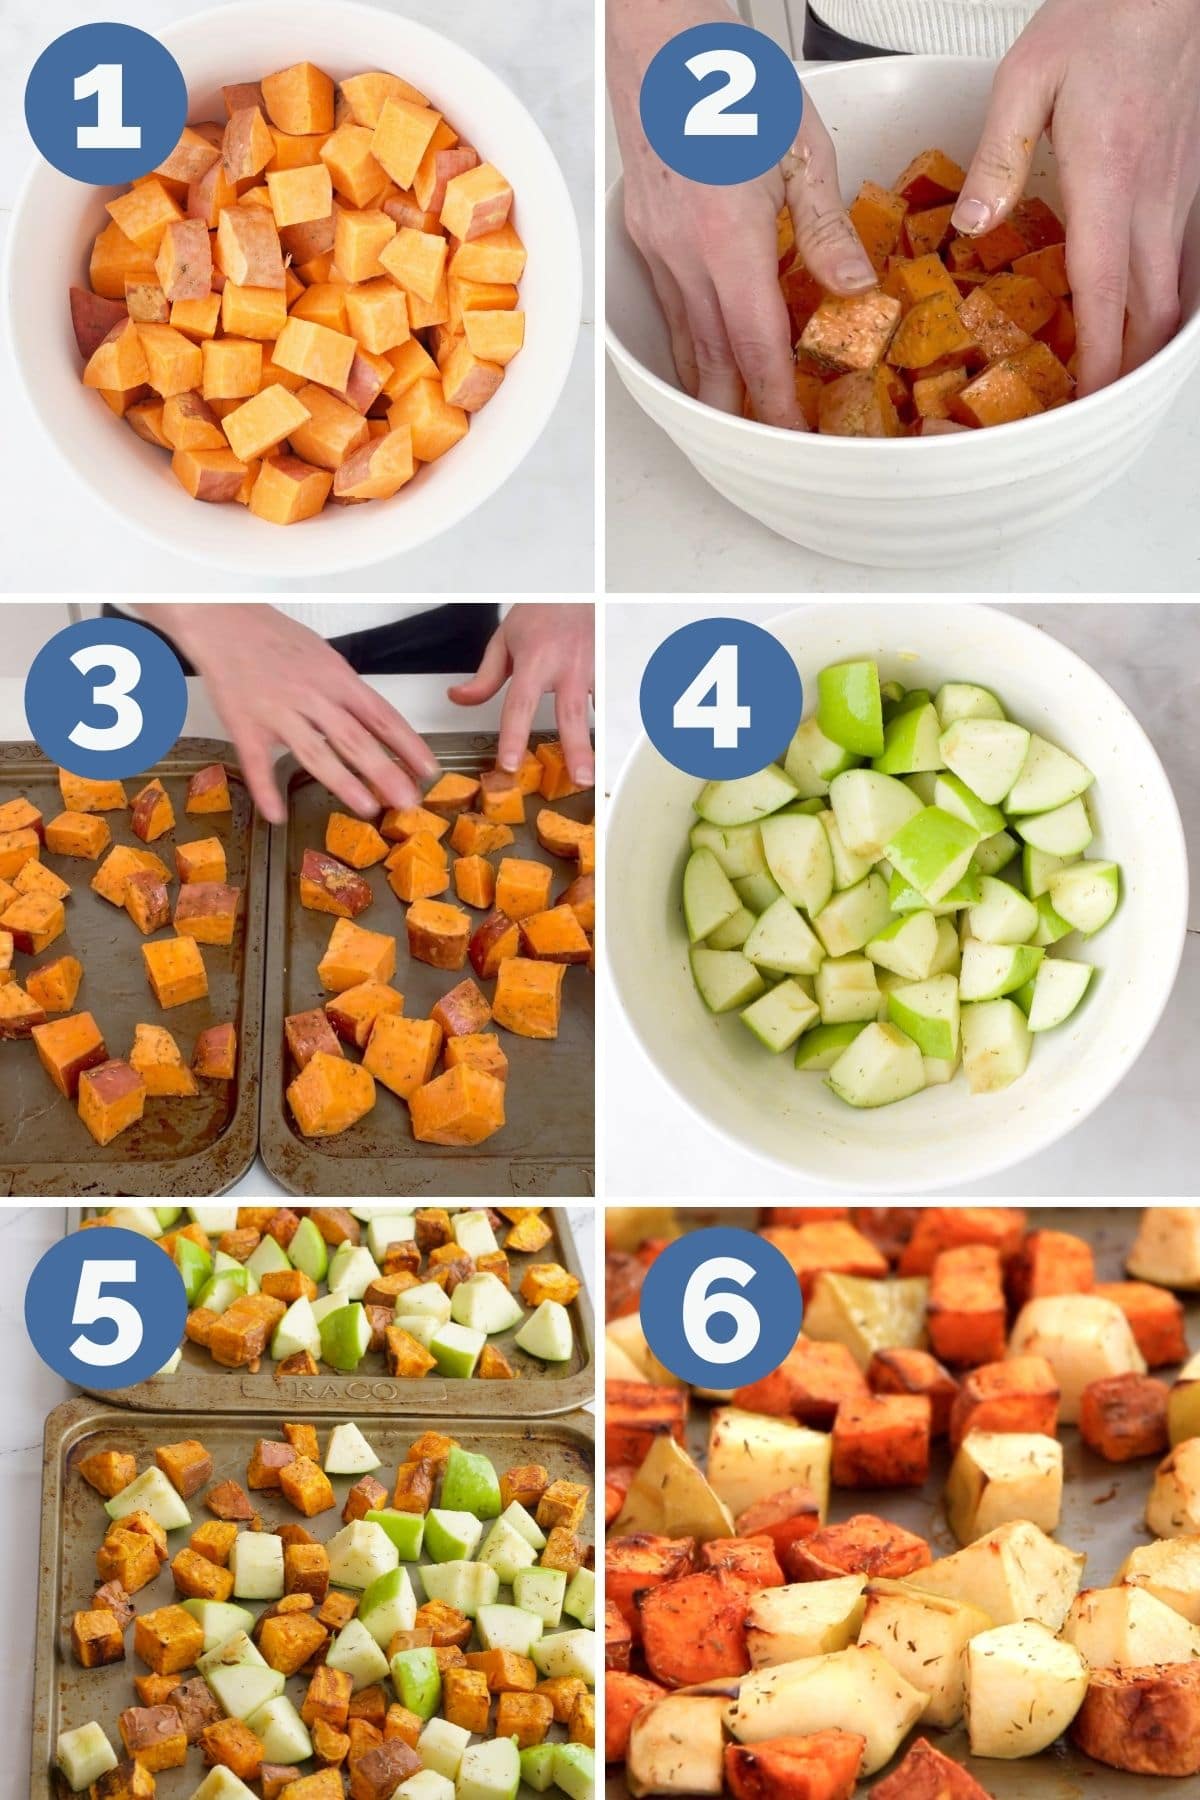 Collage of 6 Images Showing Process Steps for Making Sweet Potato and Apple Tray Bake